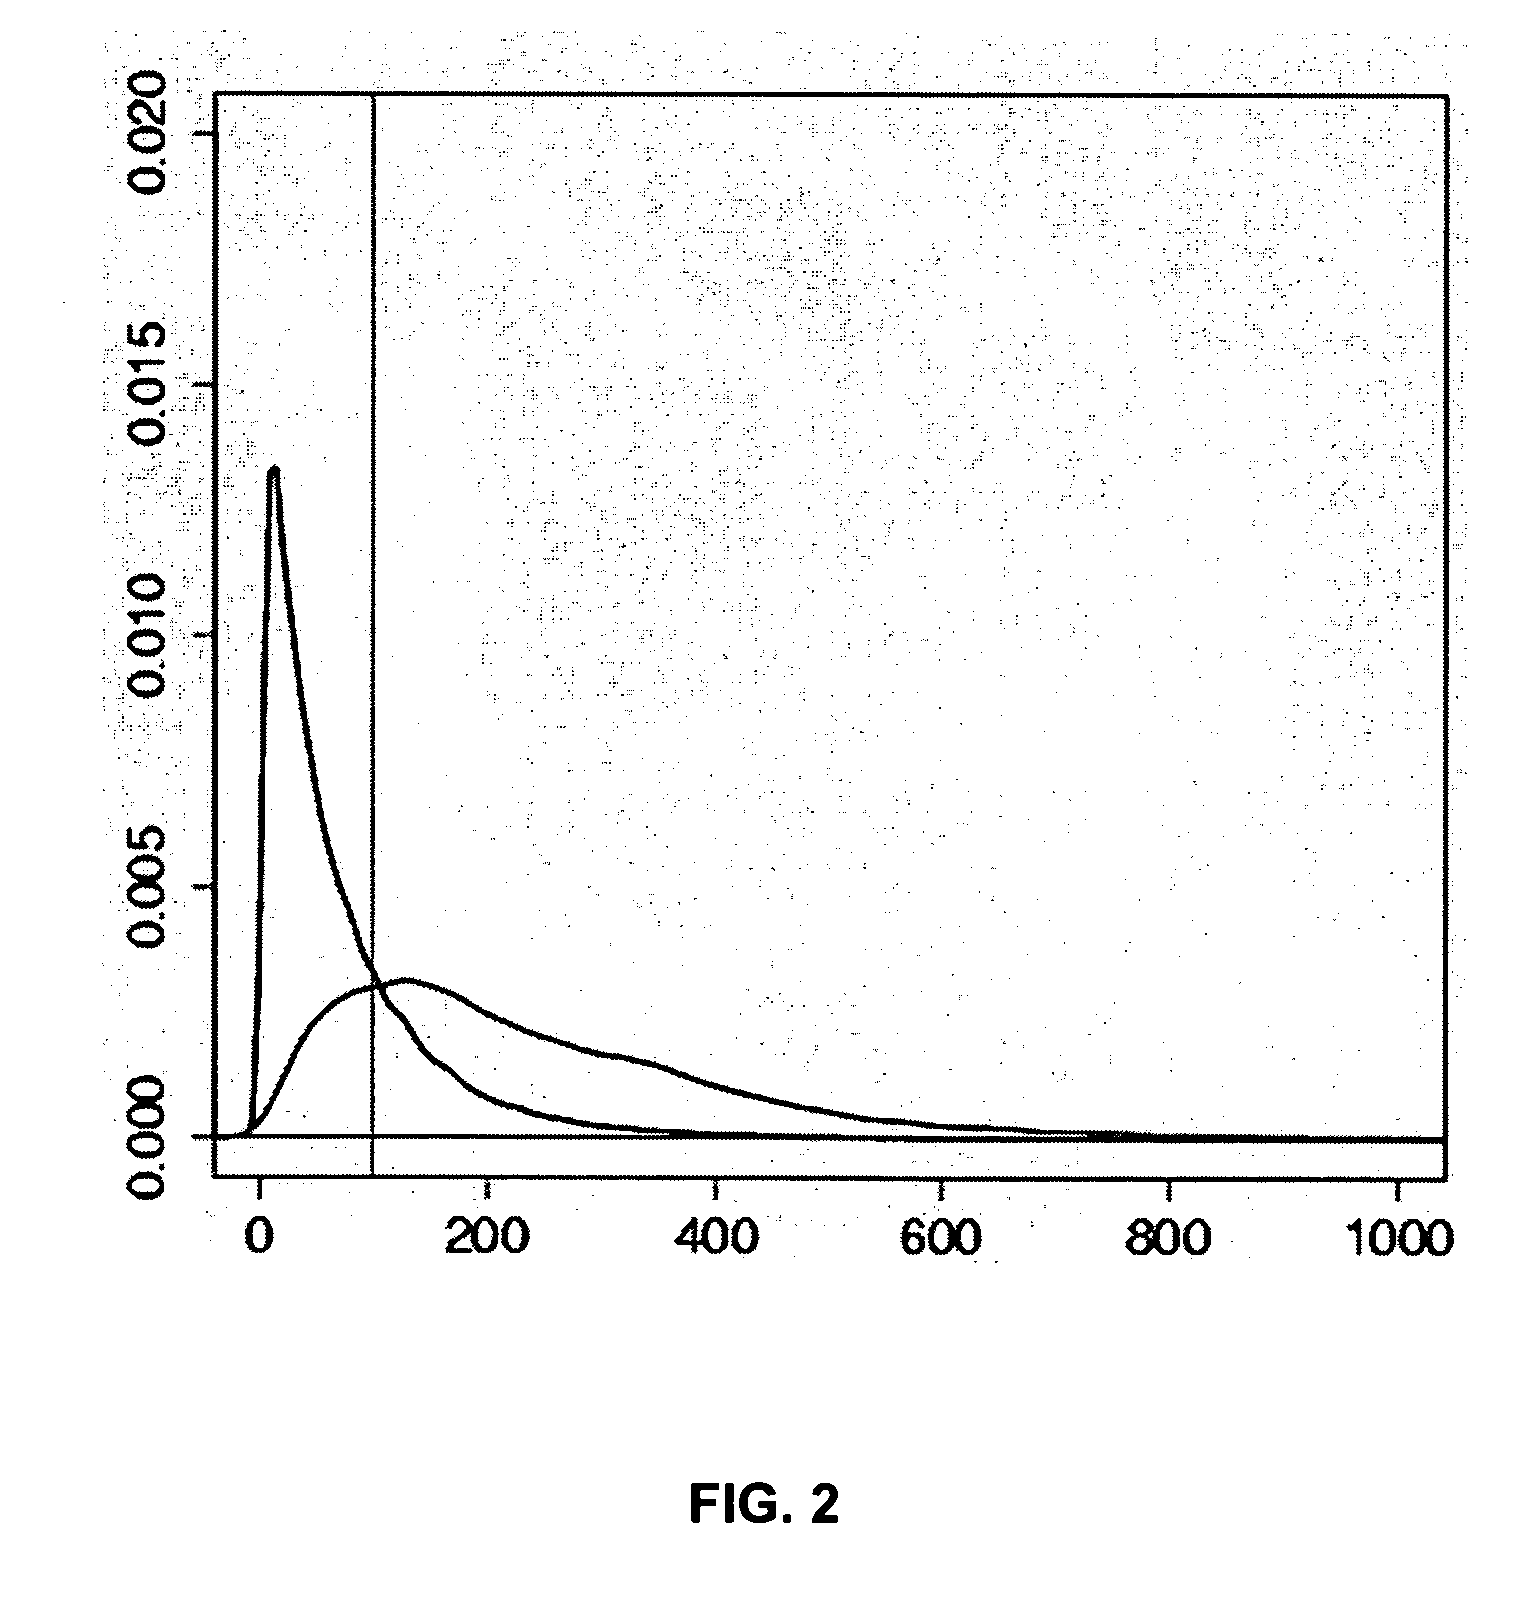 Method for determining the methylation pattern of a polynucleic acid